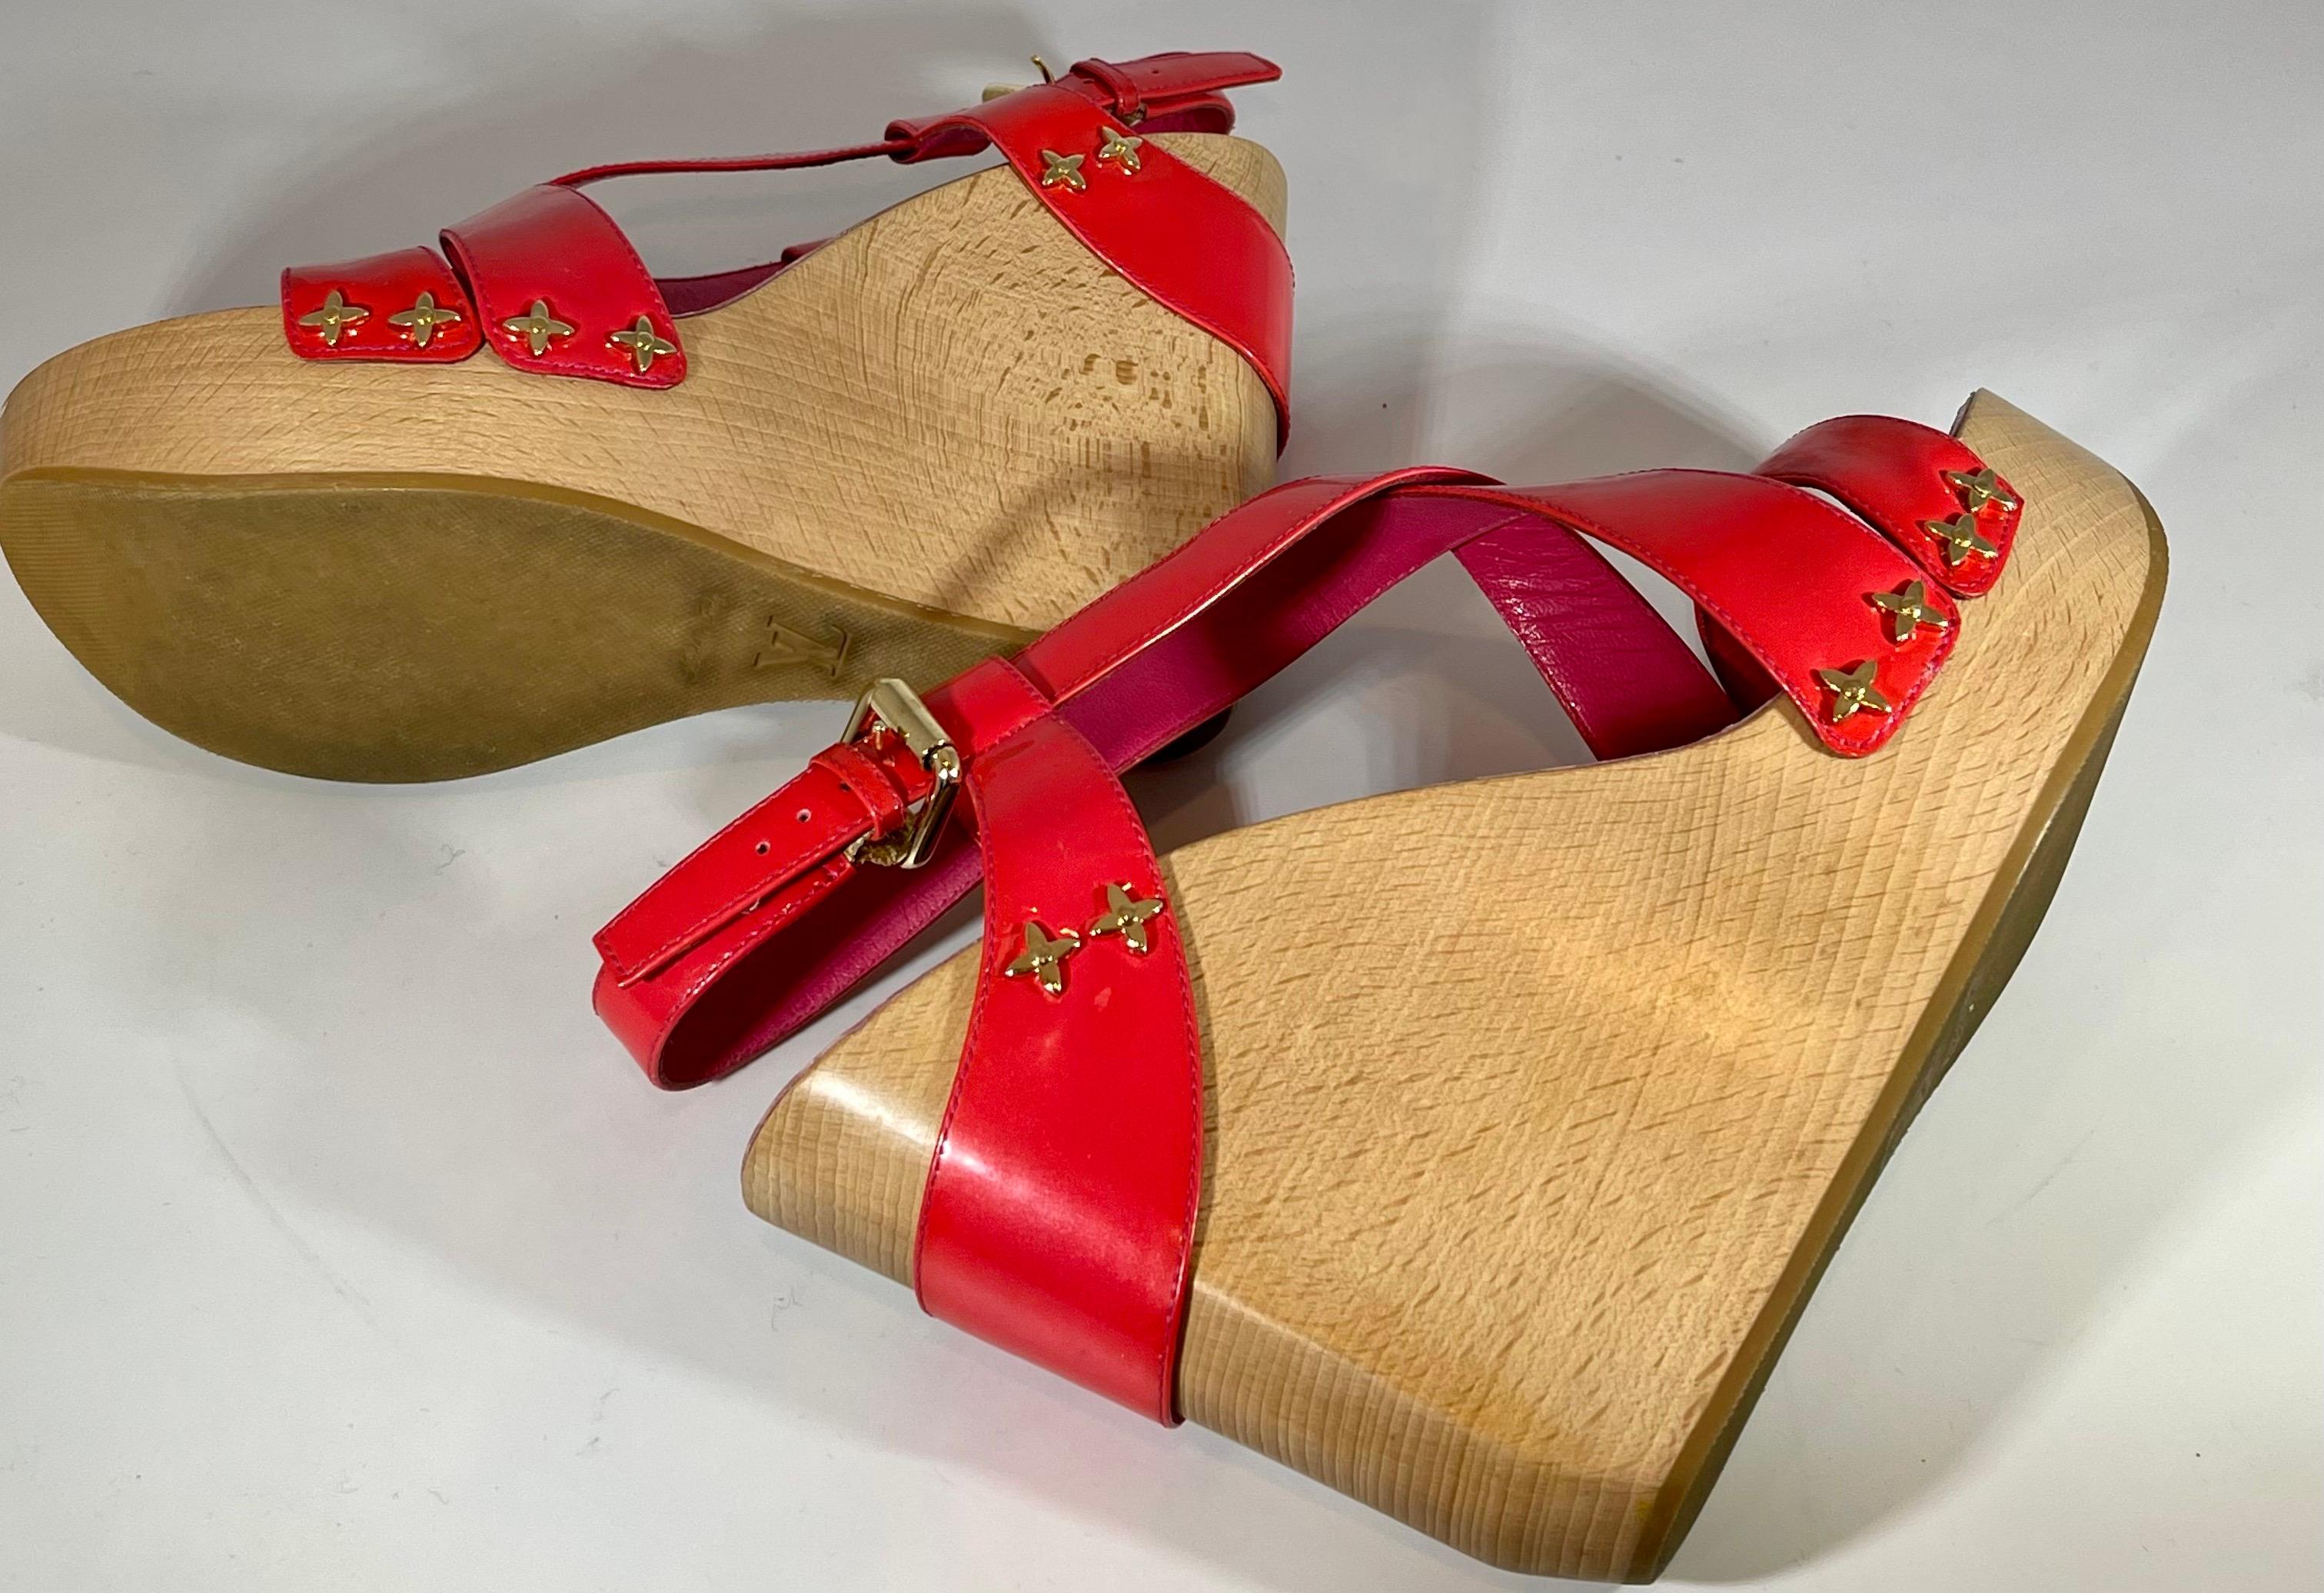 Orange Louis Vuitton Sandals Reds Calf Leather 5 Inch Wood Heels Size Euro 38, Like New For Sale